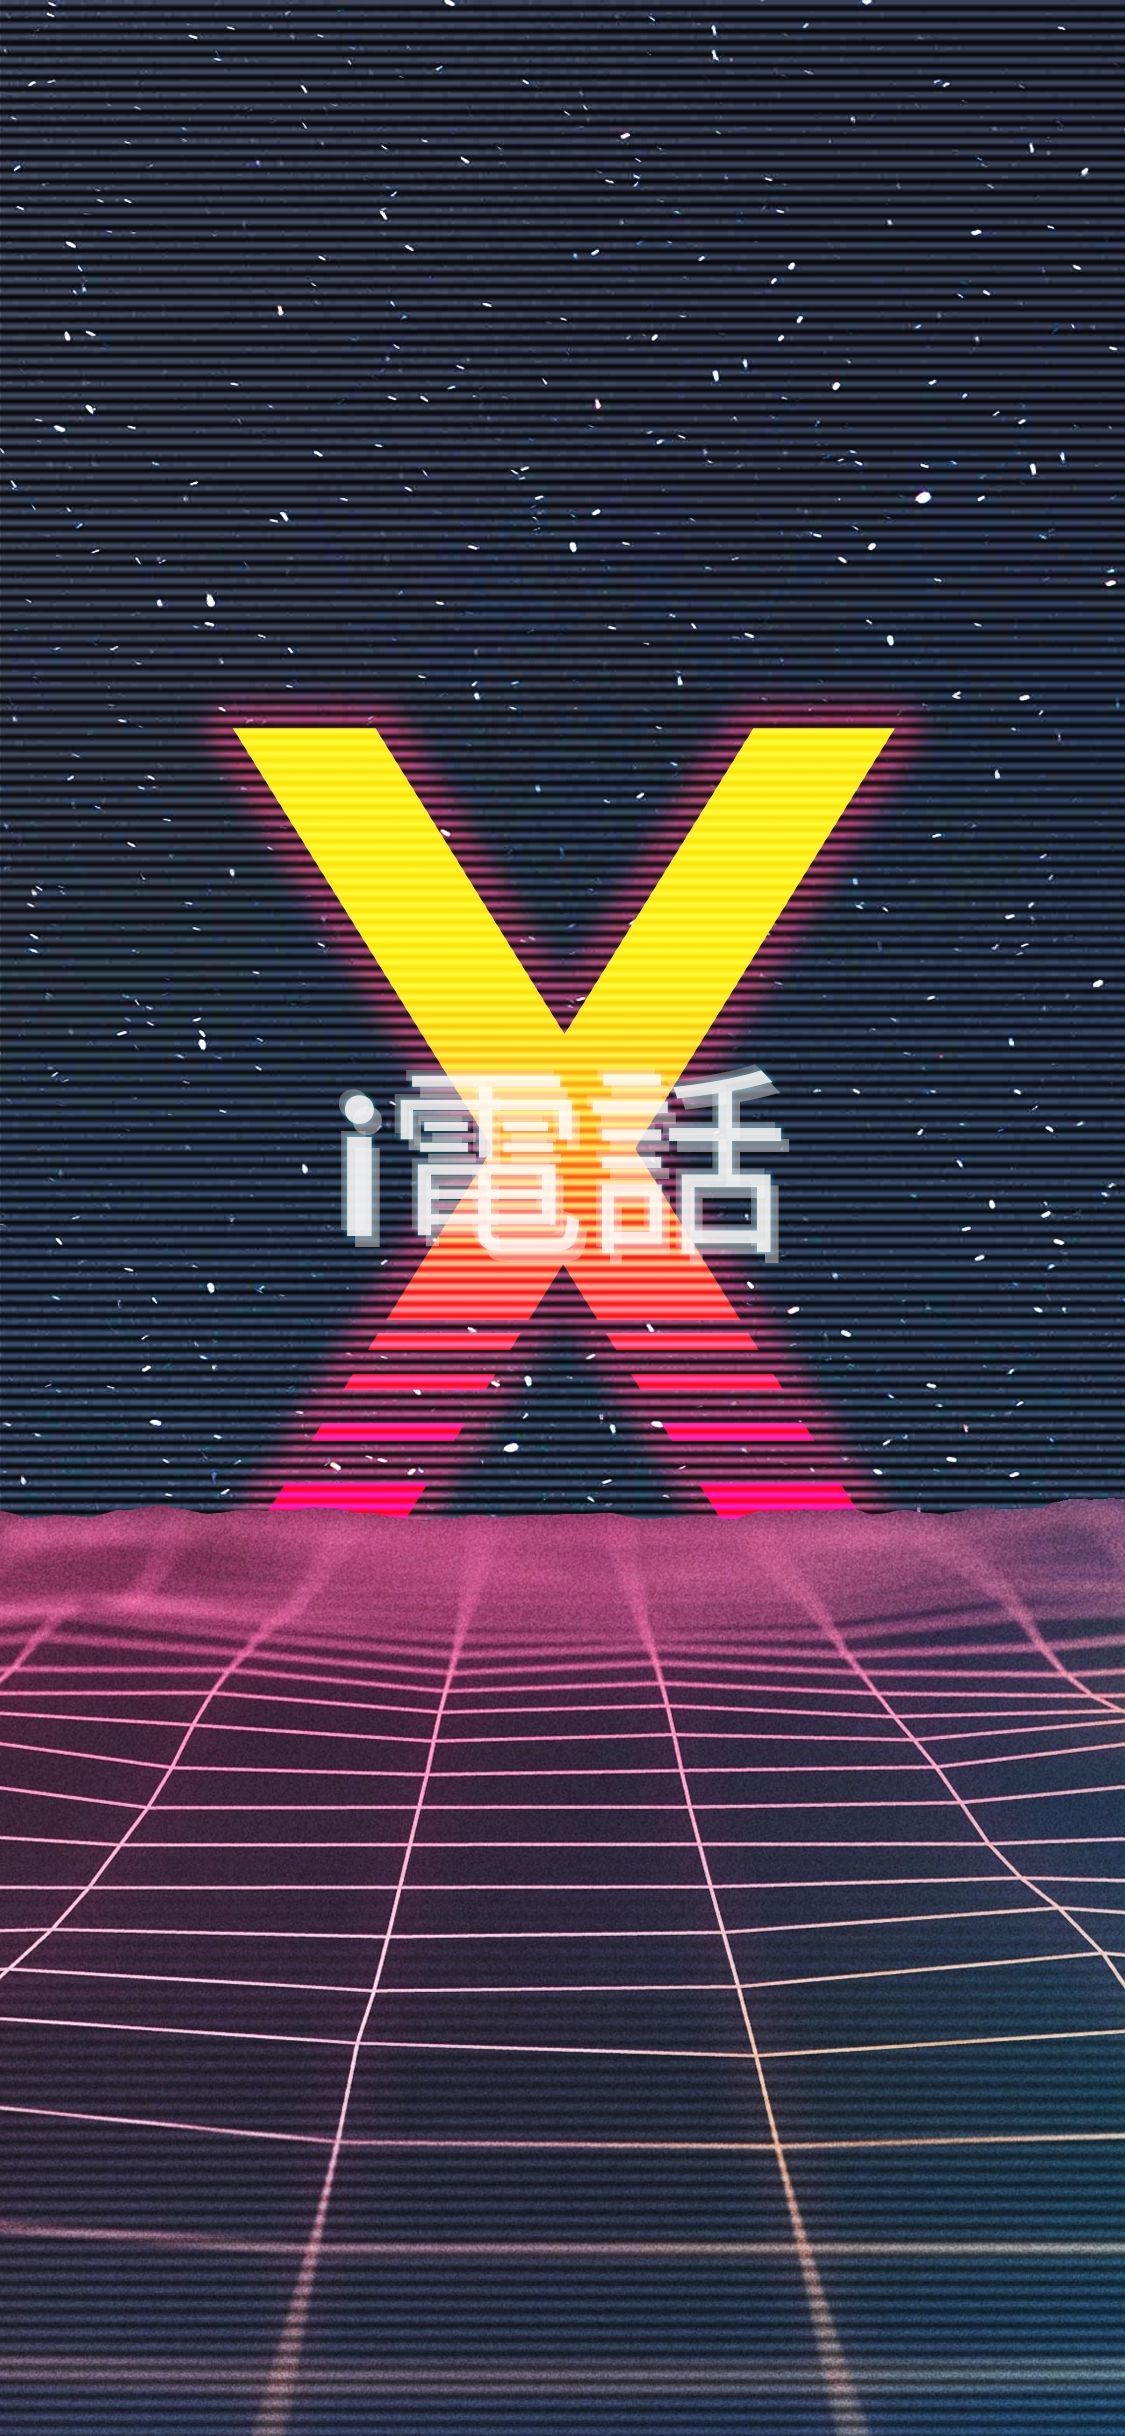 Iphone wallpaper of a neon sign that says 'Xiaozhan' - 